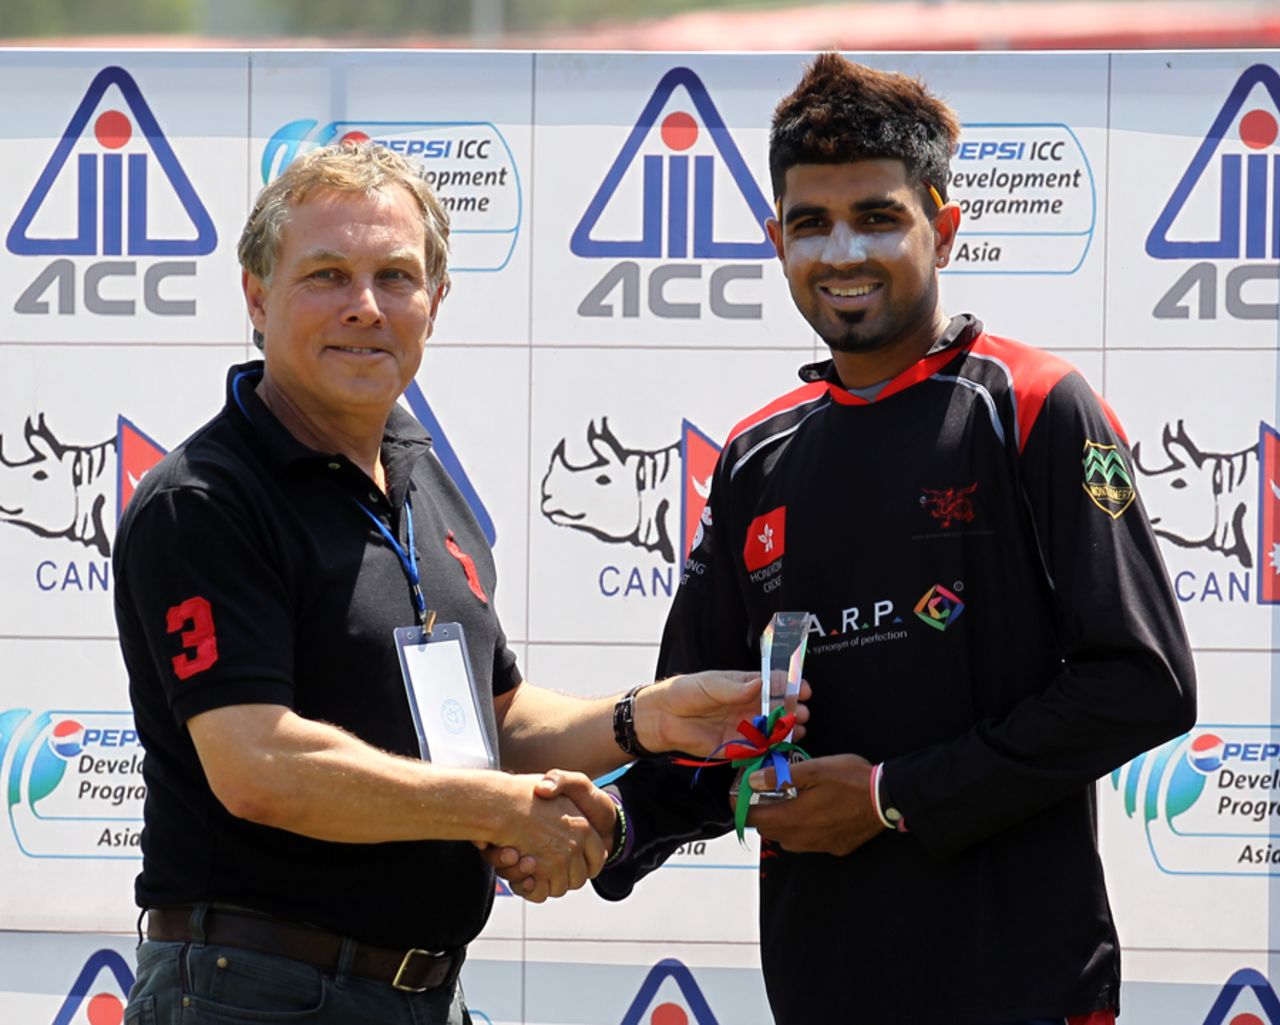 Waqas Barkat receives his Man of the Match award for his century against Maldives at the ACC Twenty20 Cup 2013 in Kathmandu